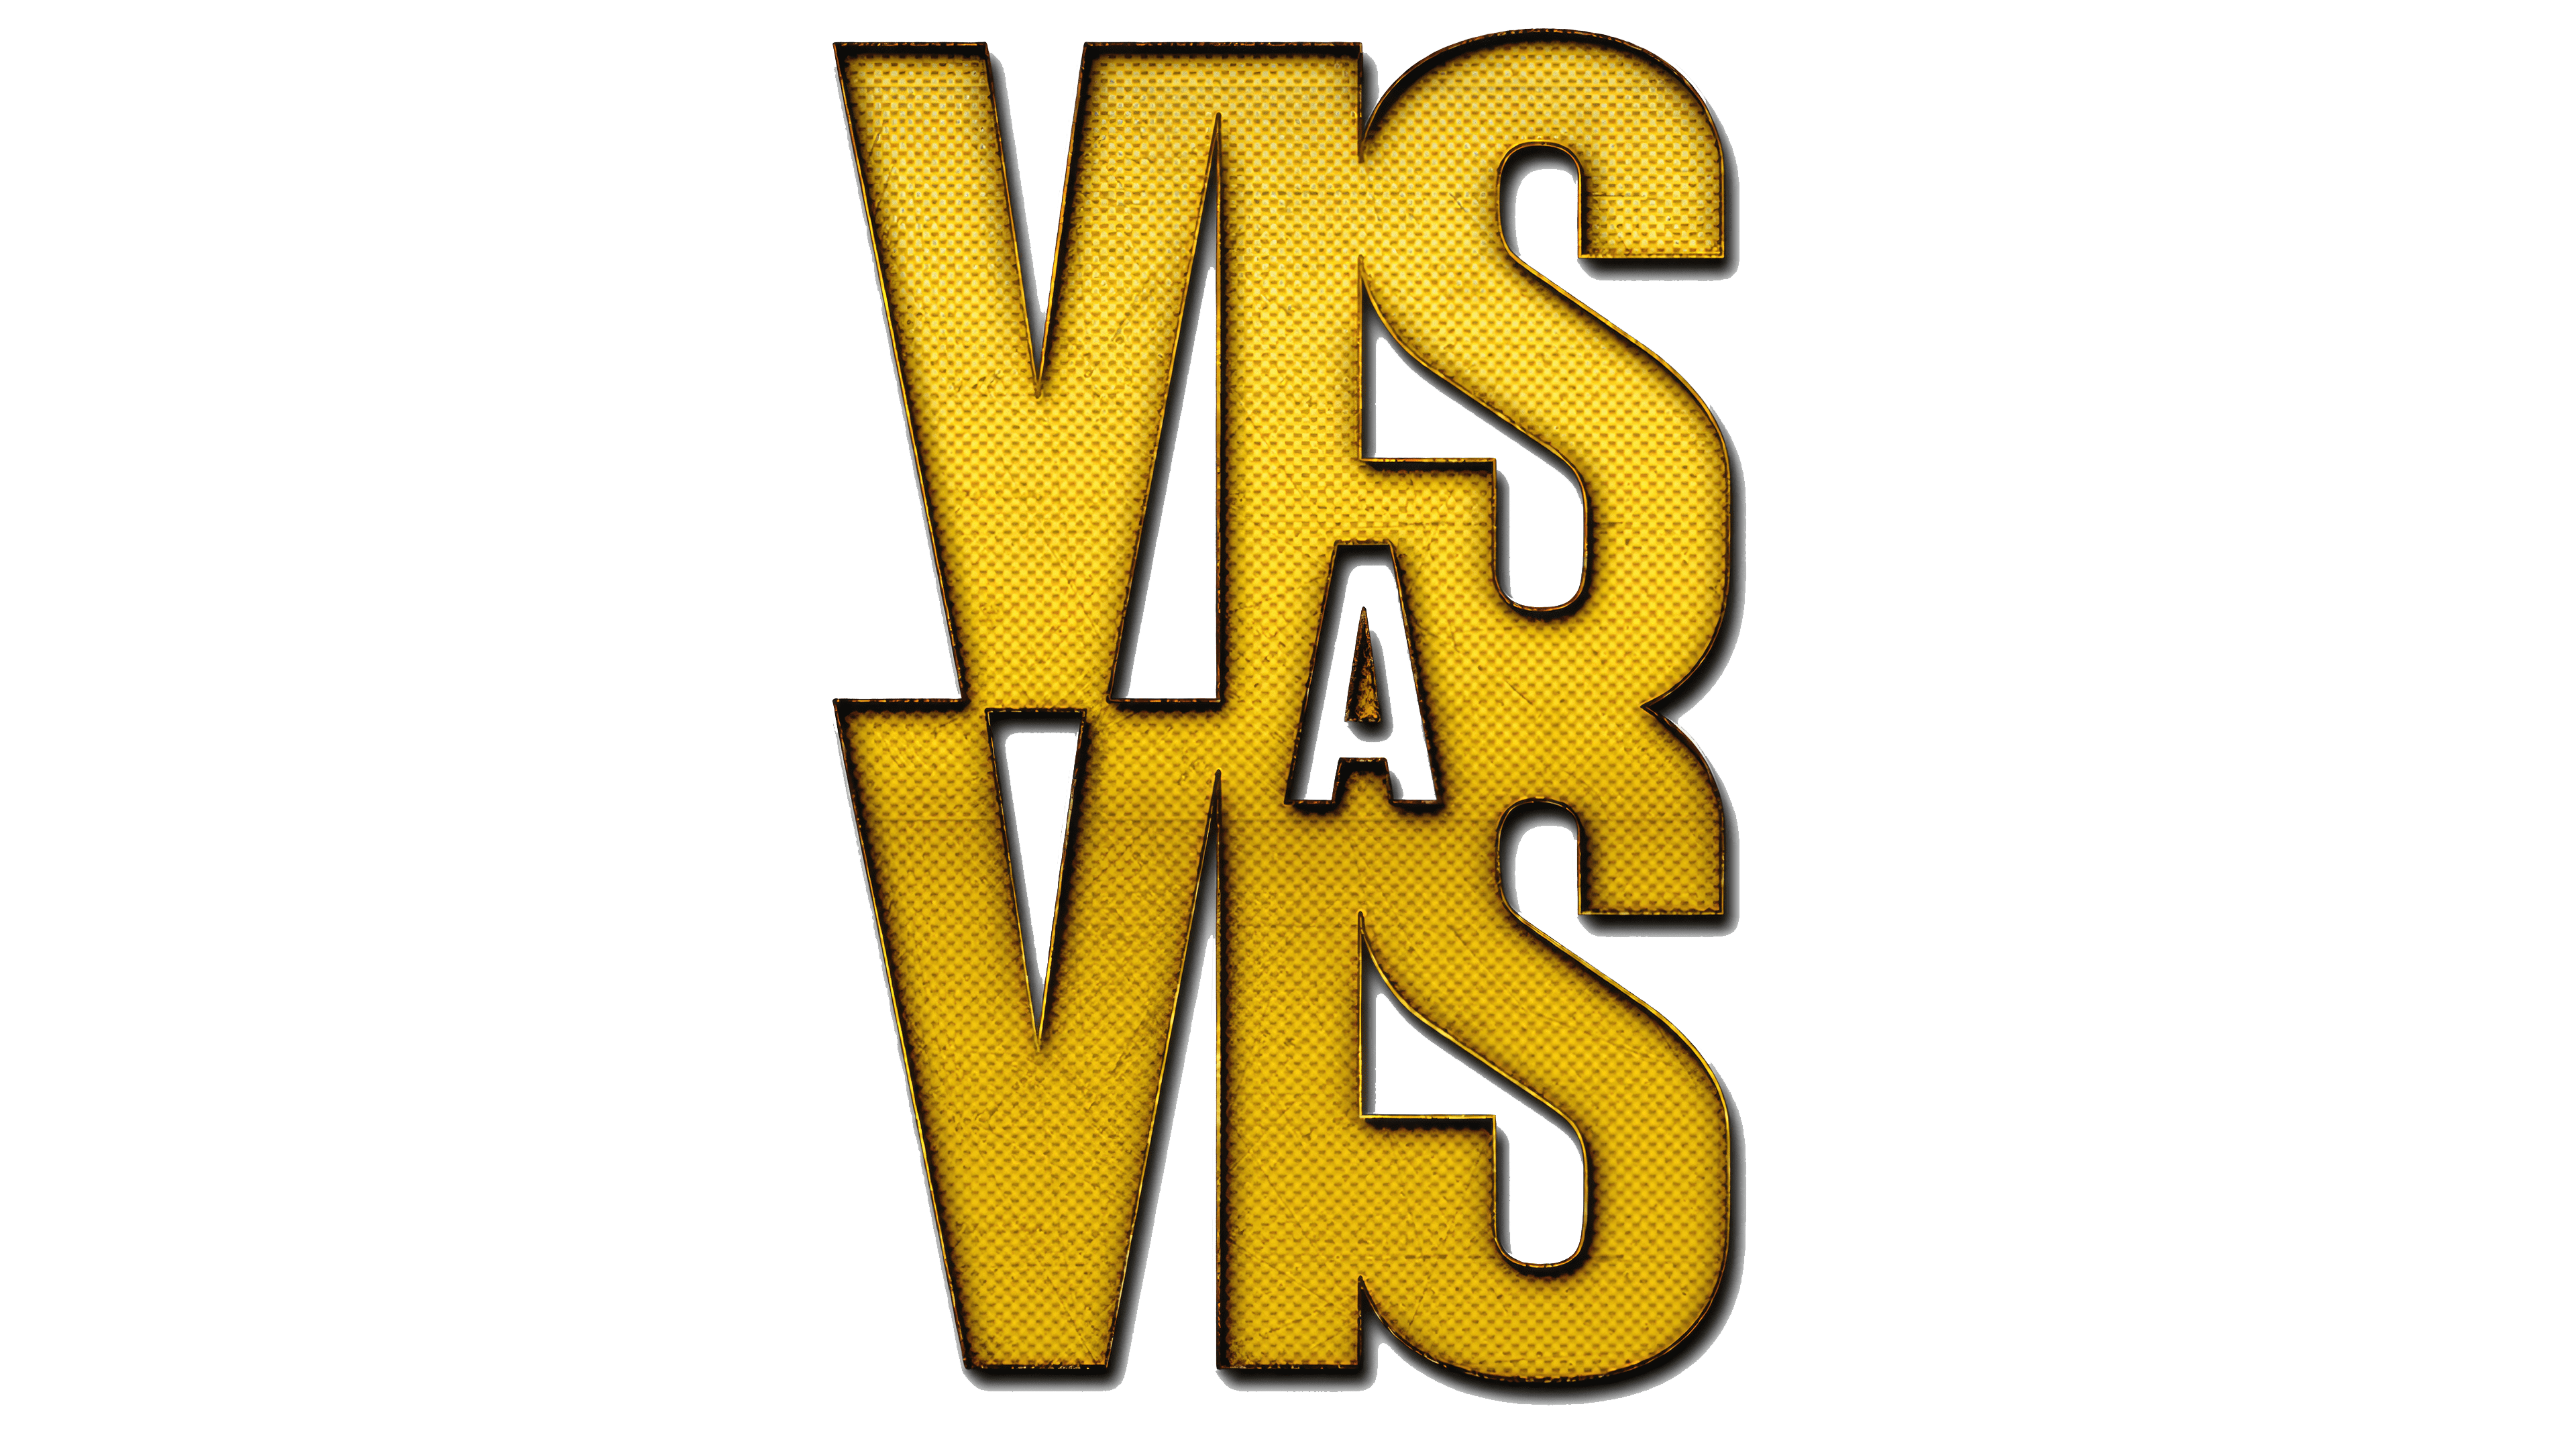 Vis a Vis (serial) Logo, symbol, meaning, history, PNG, brand